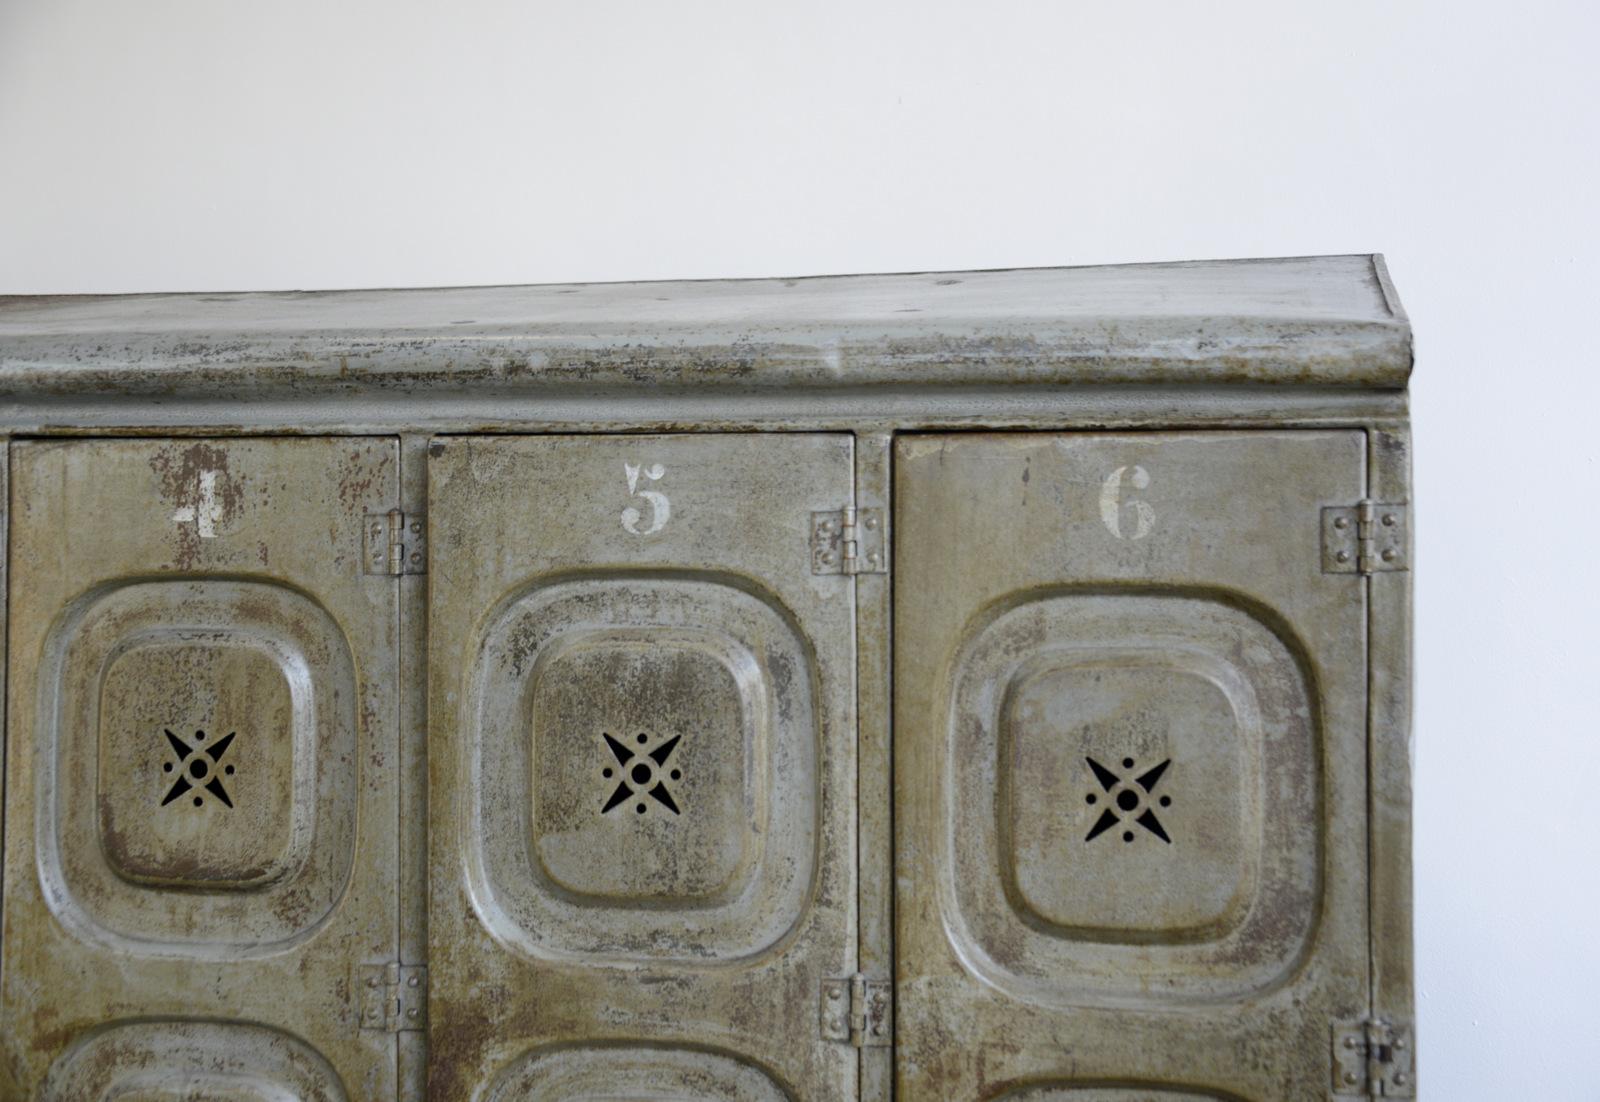 Early 20th century German factory lockers

- Pressed steel with star detail vents
- Original grey paint
- Each locker compartment has 4 hanging hooks and a shelf
- Made by Kuppersbusch
- German, 1900
- Measures: 192 cm tall x 141 cm wide x 40